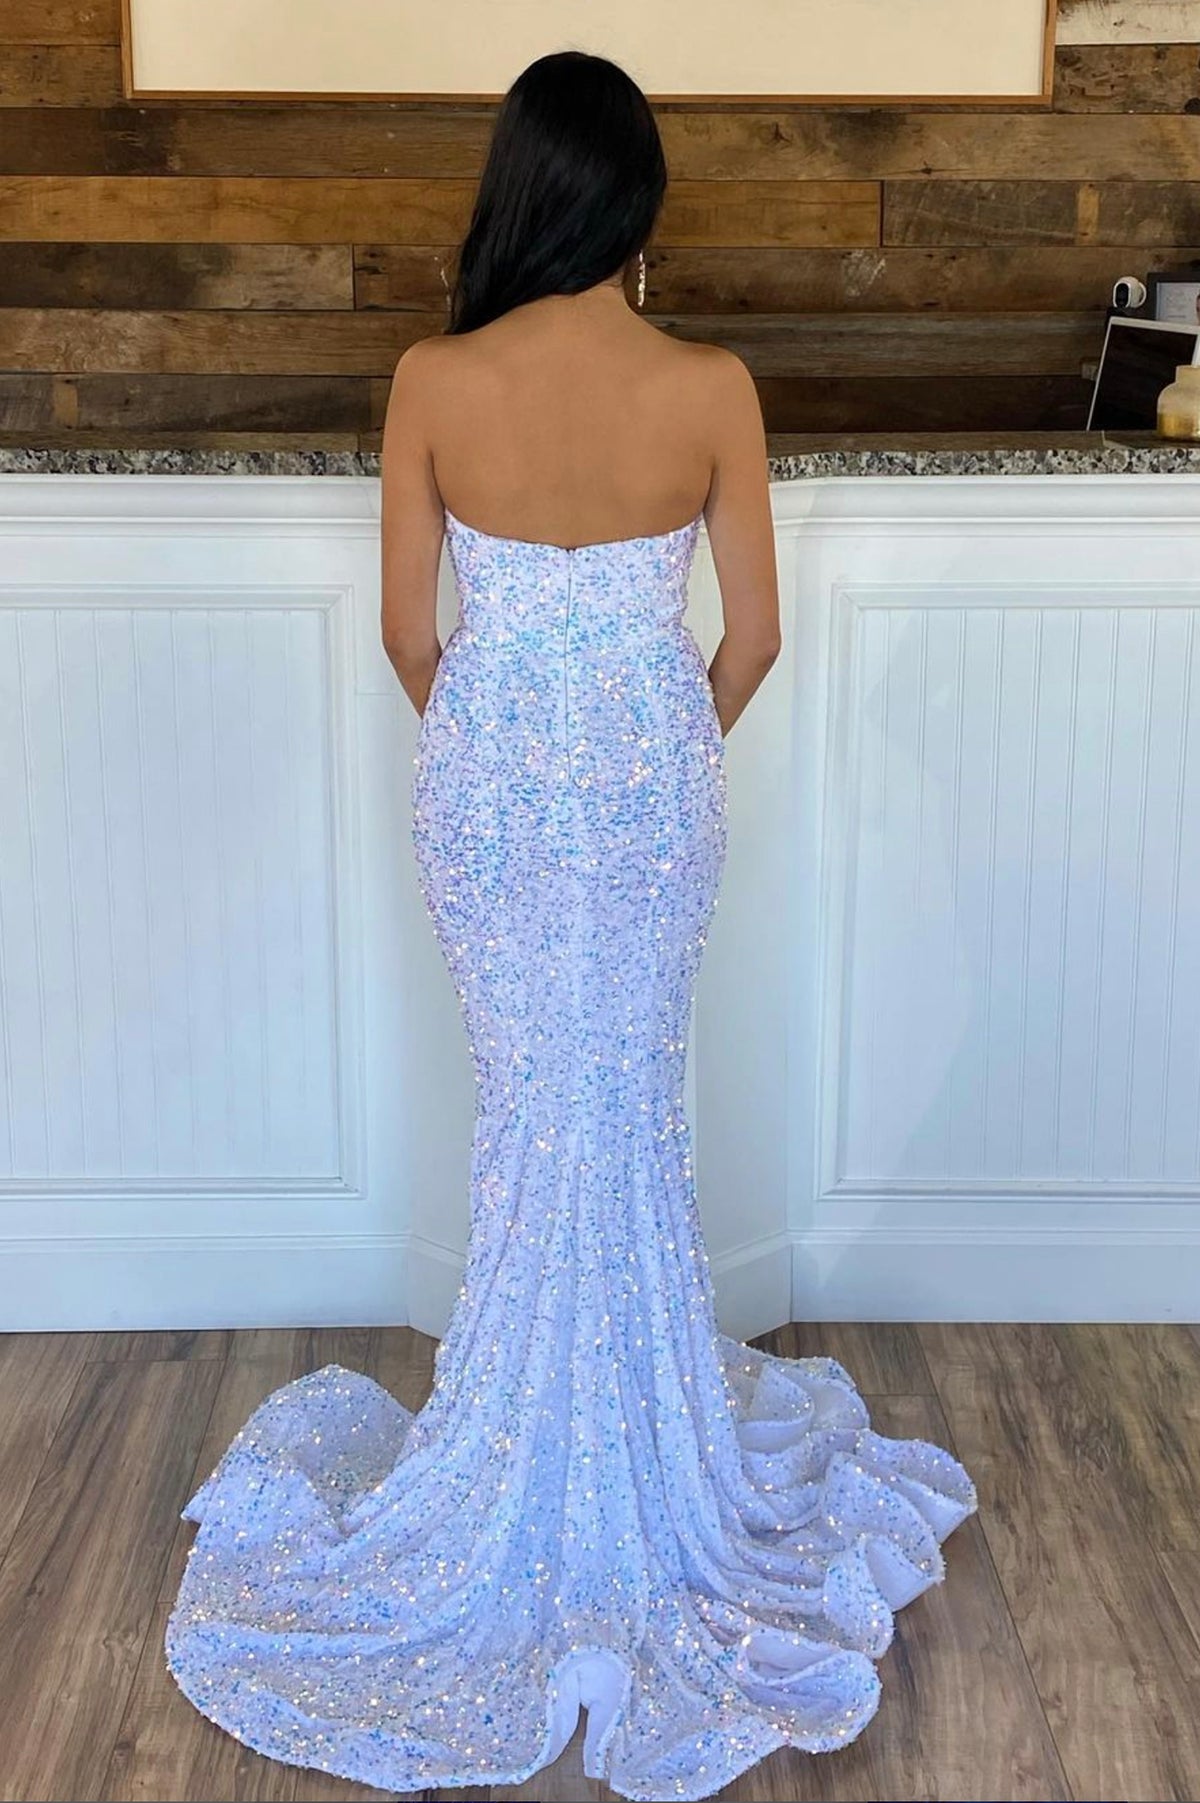 Mermaid Sequins Long Prom Dress, White Strapless Evening Party Dress